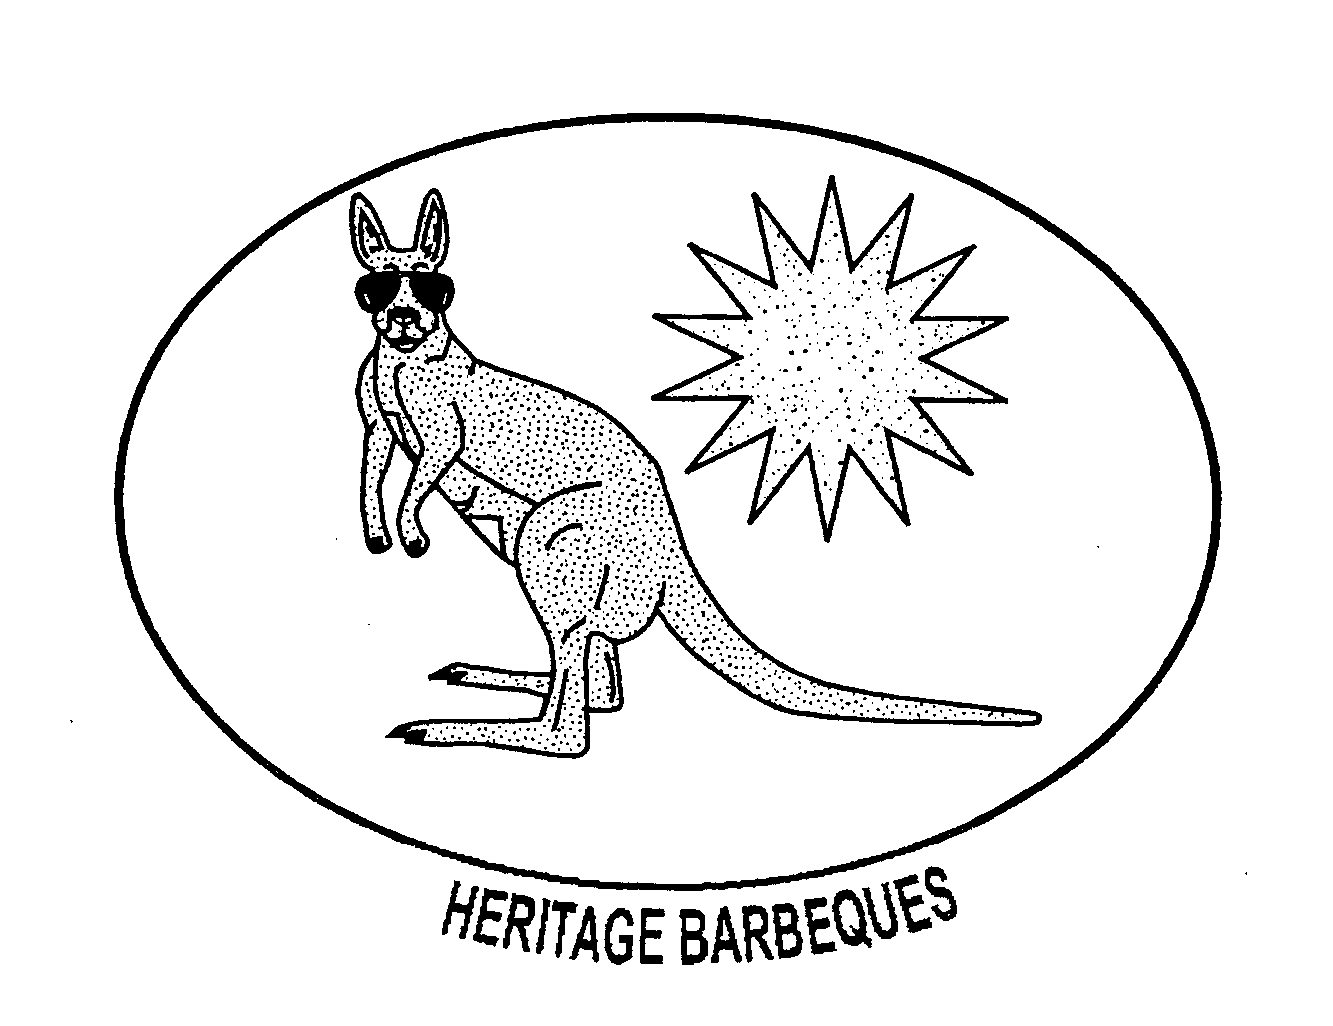  HERITAGE BARBEQUES